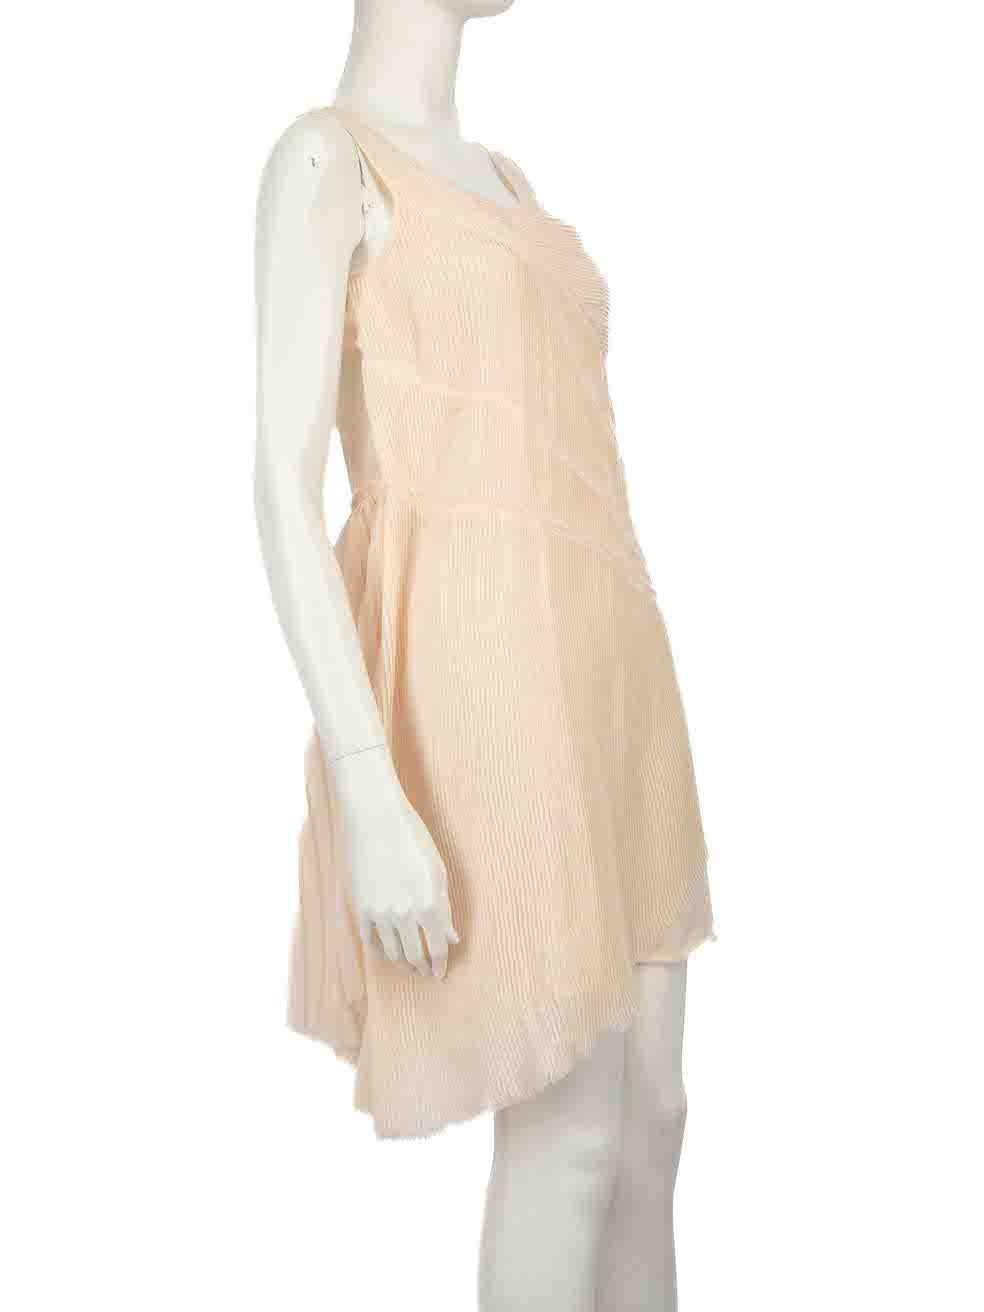 CONDITION is Very good. Minimal wear to dress is evident. Minimal discolouration on the lining hem on this used Acne Studios designer resale item.
 
 
 
 Details
 
 
 Peach
 
 Polyester
 
 Dress
 
 Pleated
 
 Sleeveless
 
 Round neck
 
 Stretchy
 
